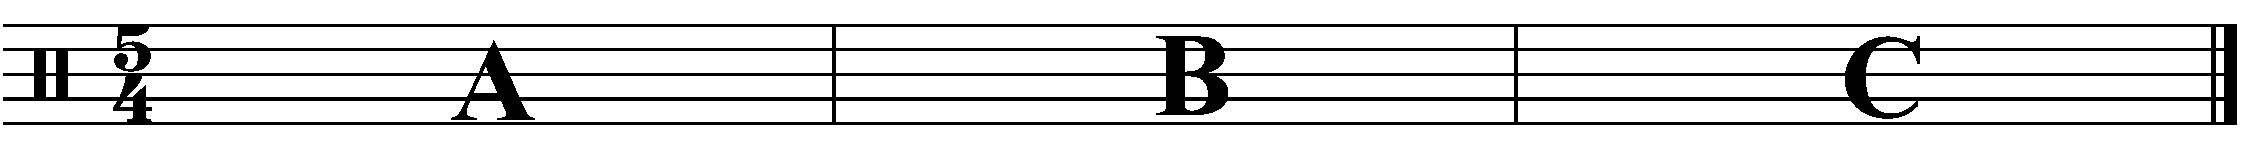 A three bar phrase made up of 3 different sections in the time signature of 5/4.